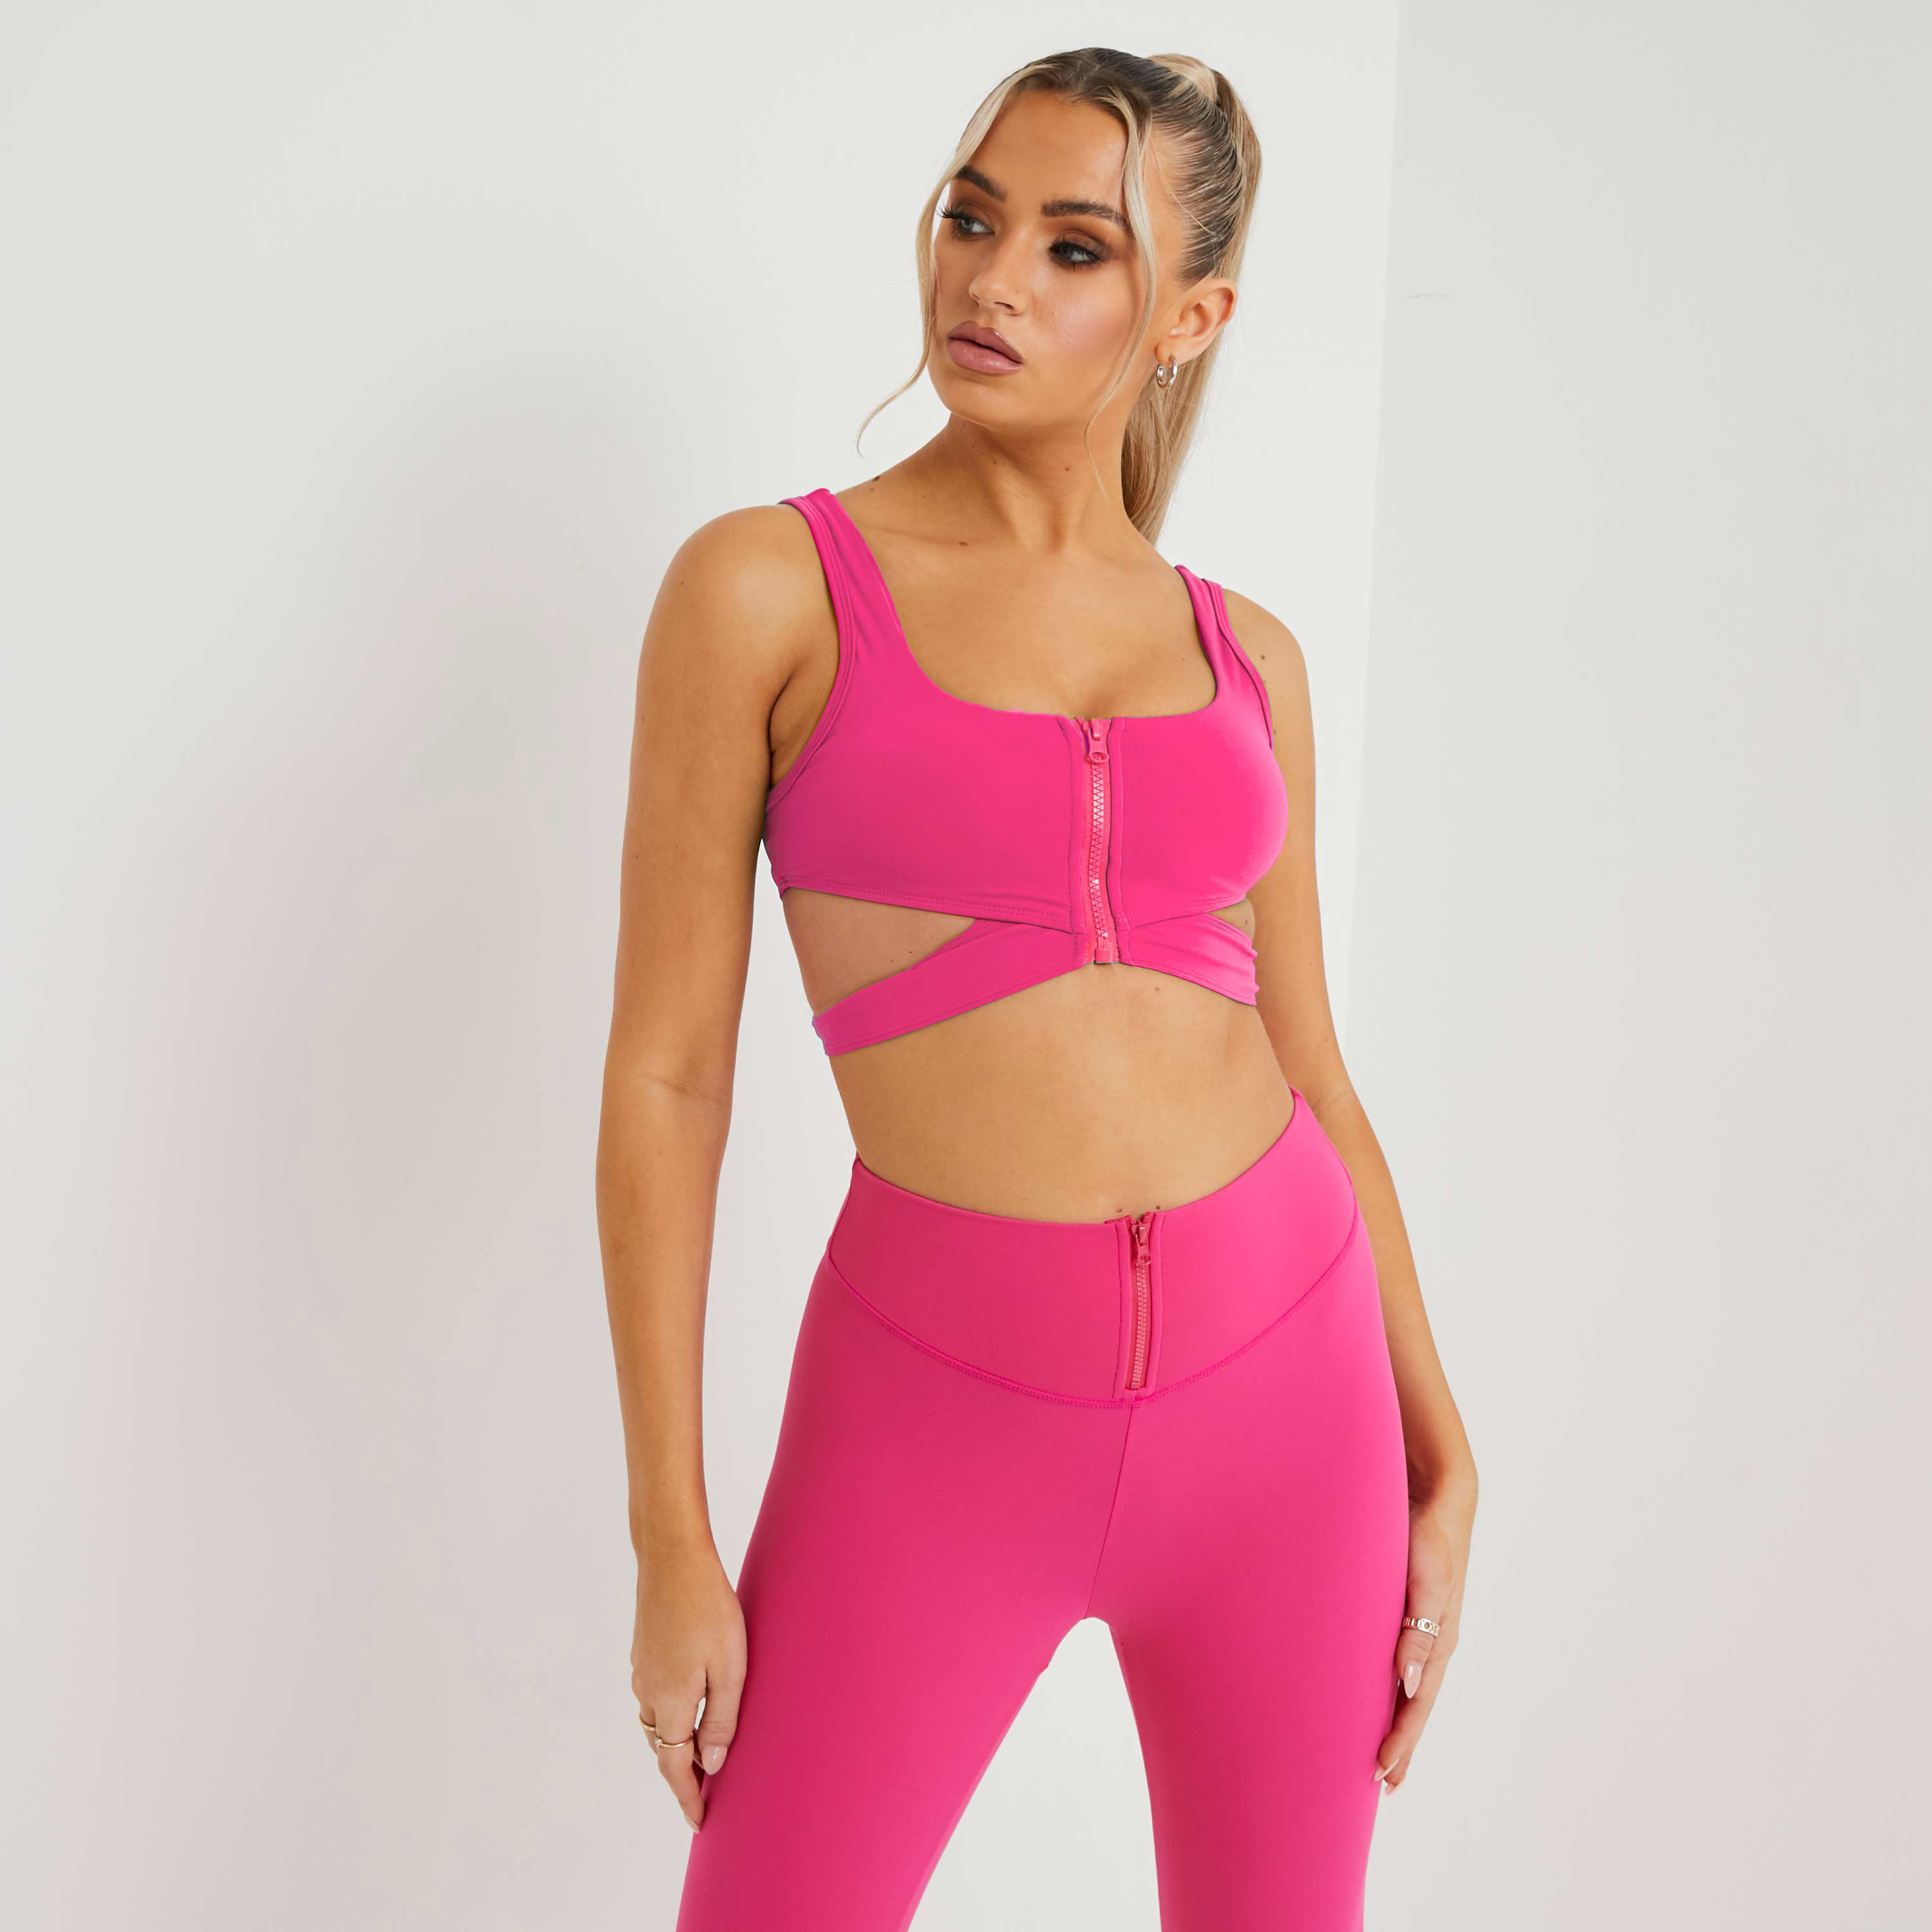 Zip Up Square Neck Cut Out Cross Strap Detail Sports Bra In Pink UK Small S, Pink